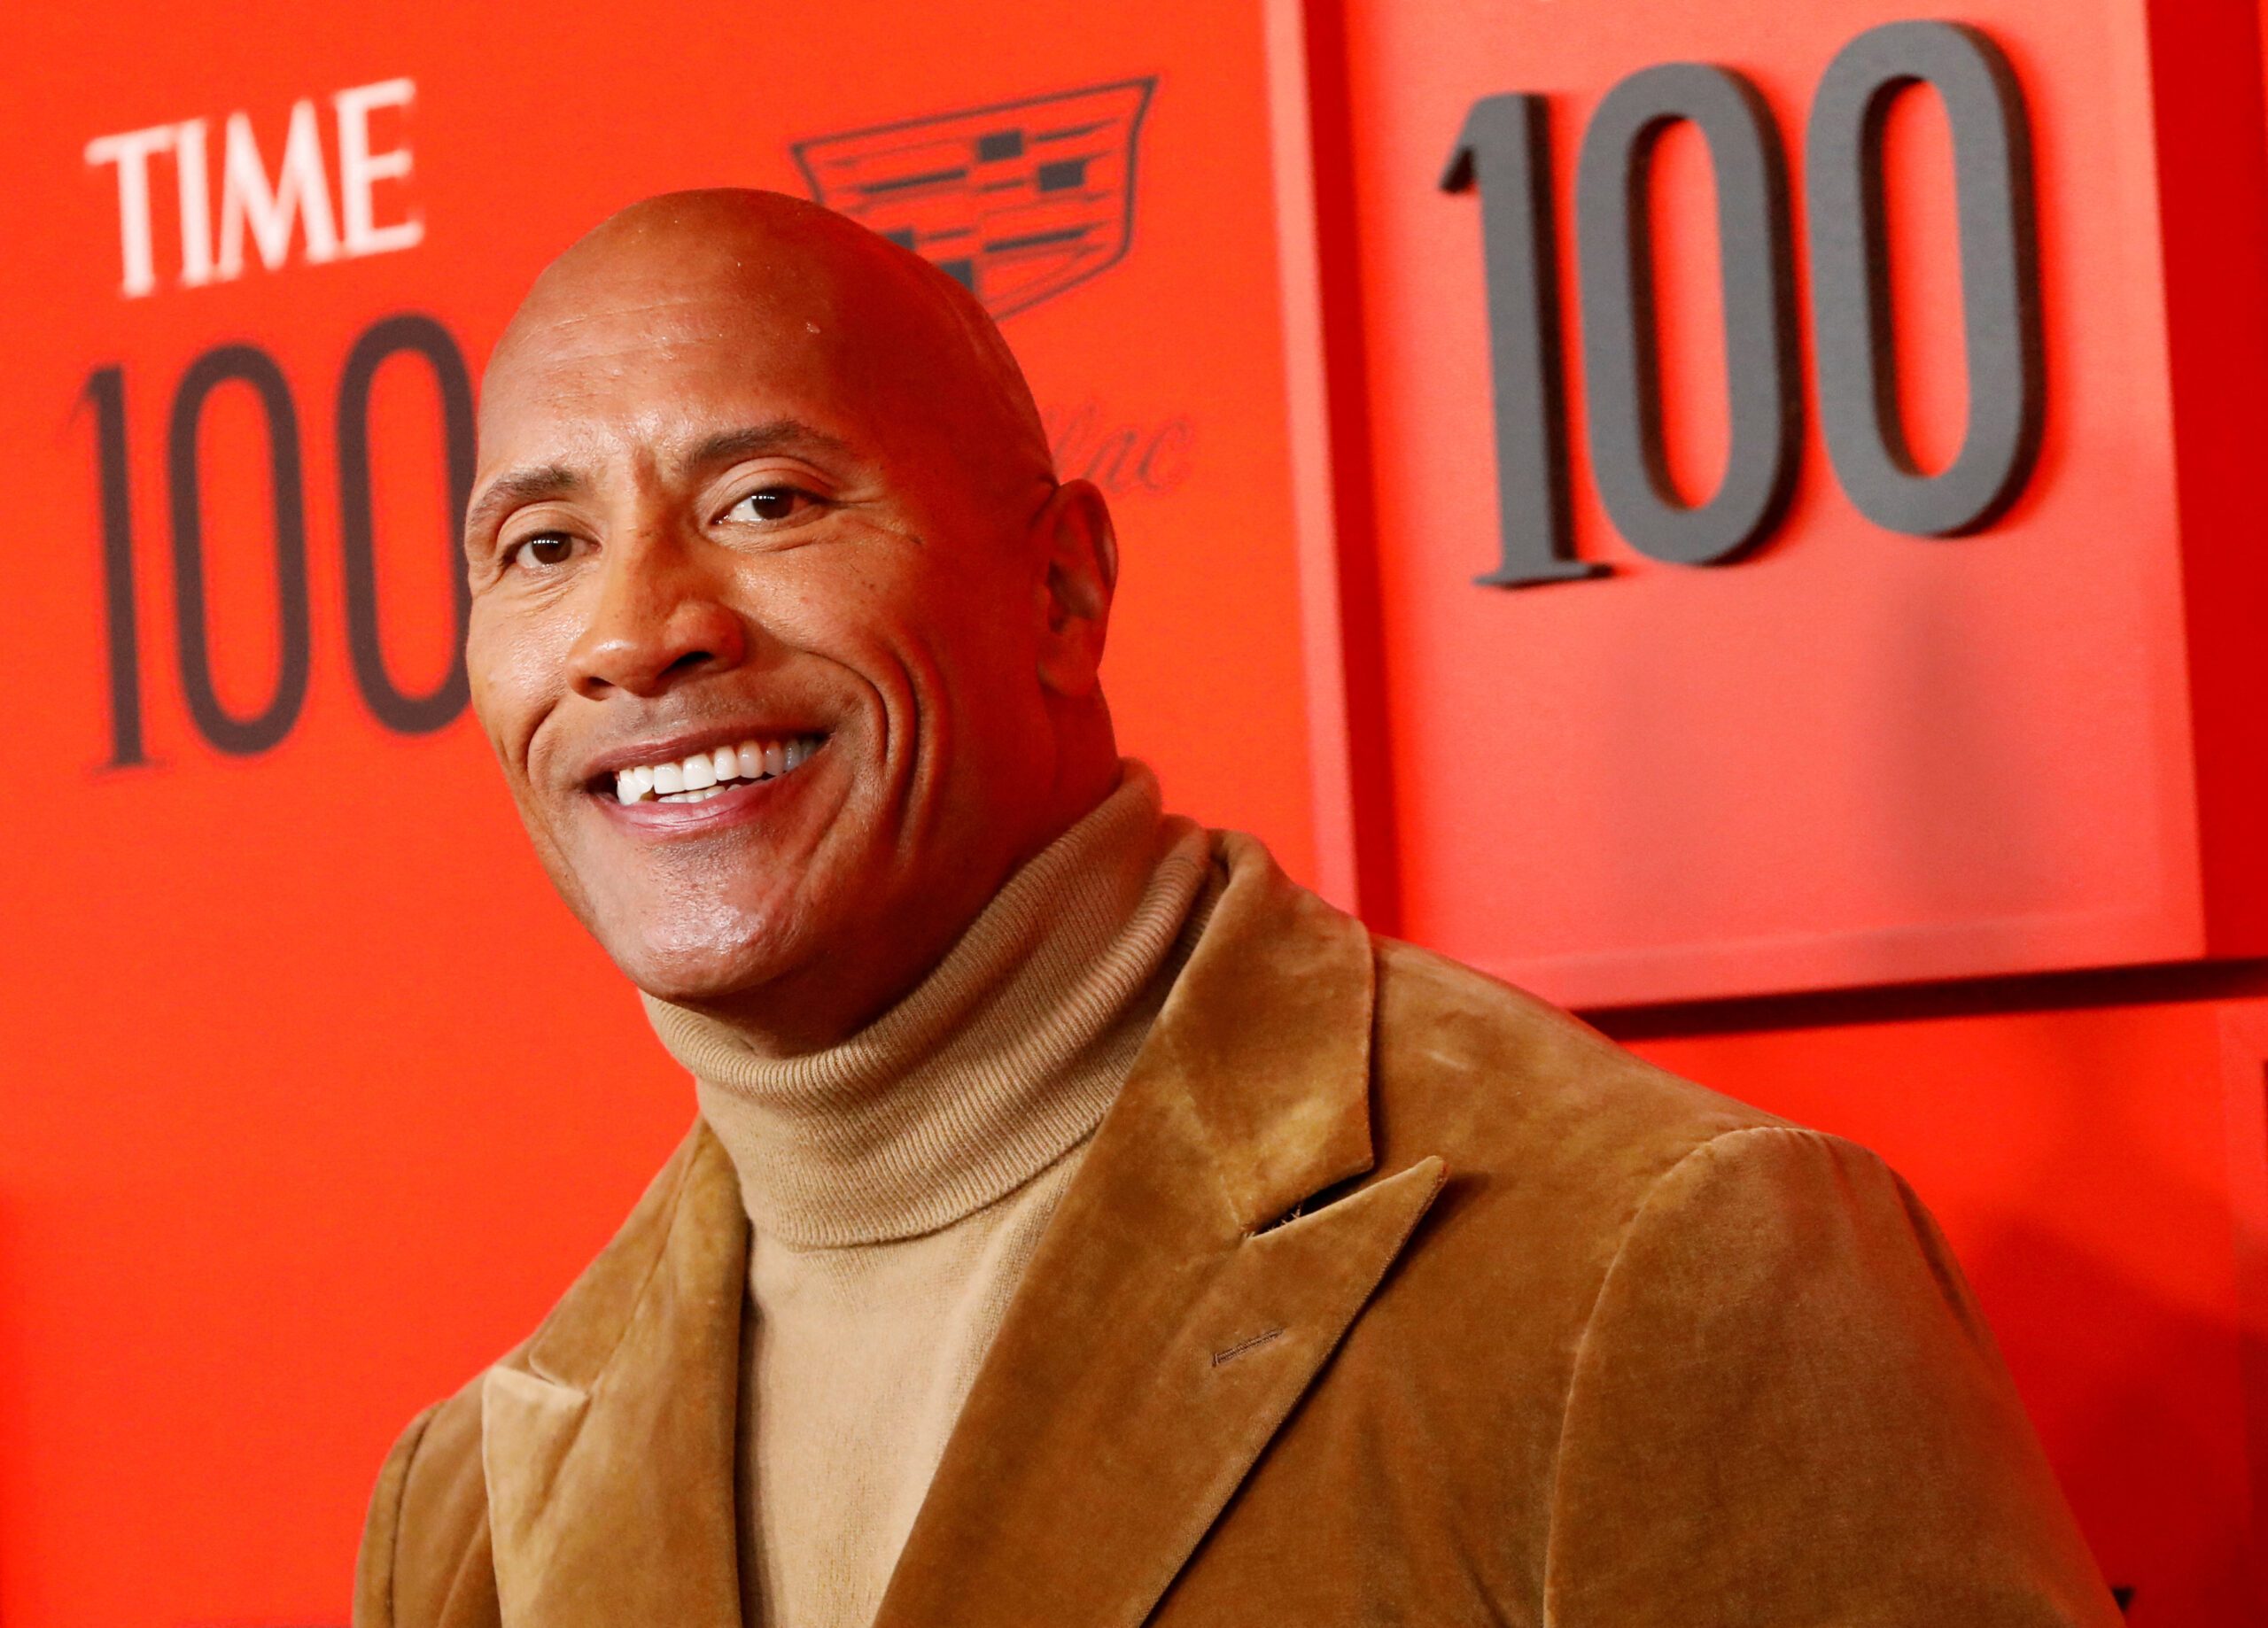 Dwayne The Rock Johnson starring in new Fast & Furious film about Hobbs